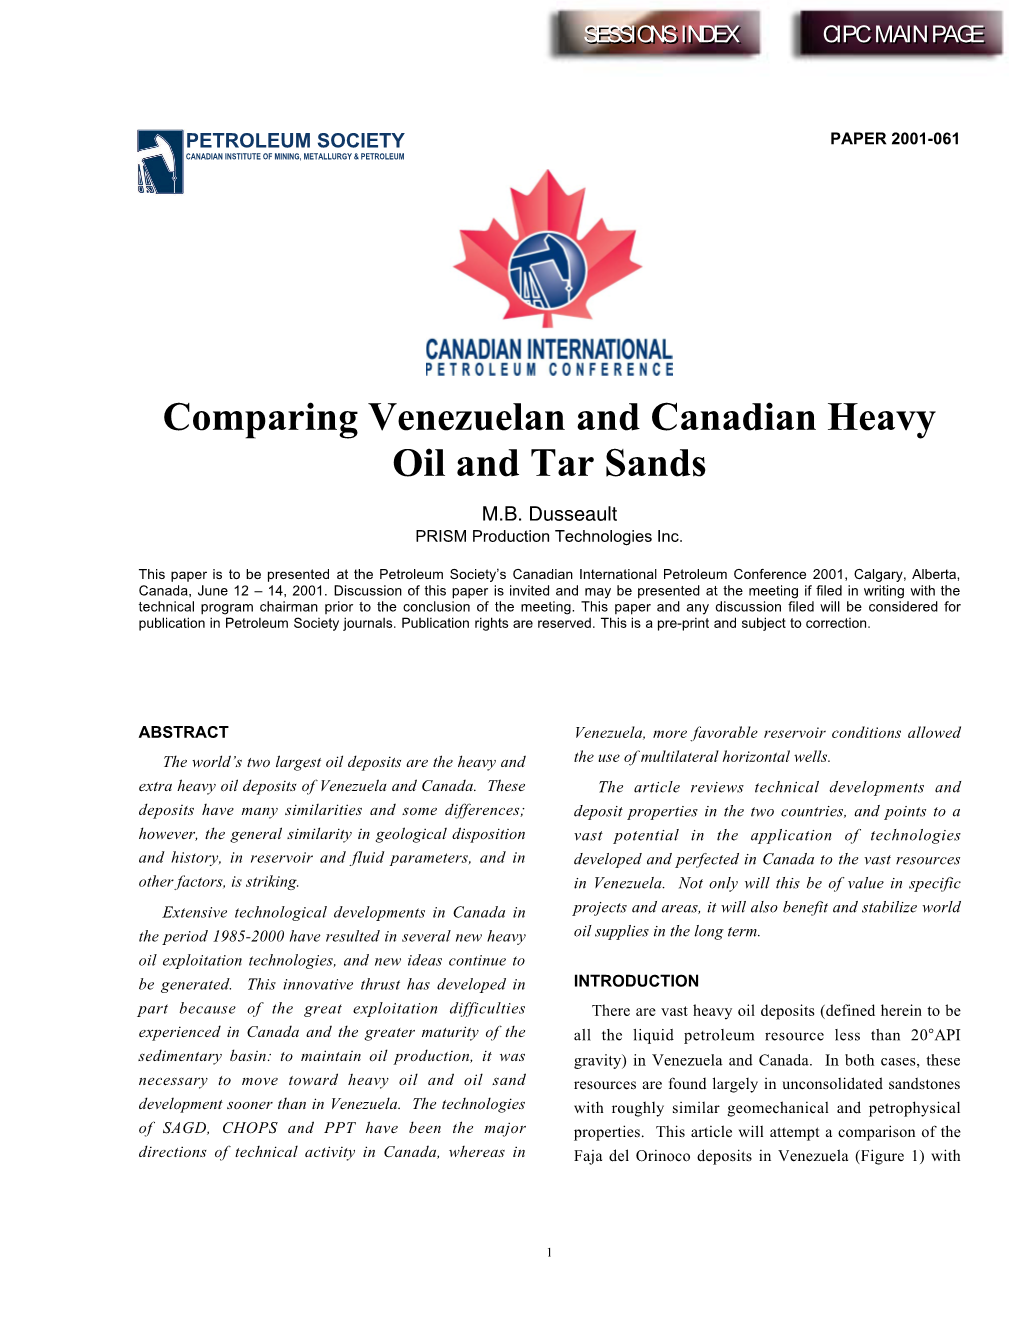 Comparing Venezuelan and Canadian Heavy Oil and Tar Sands